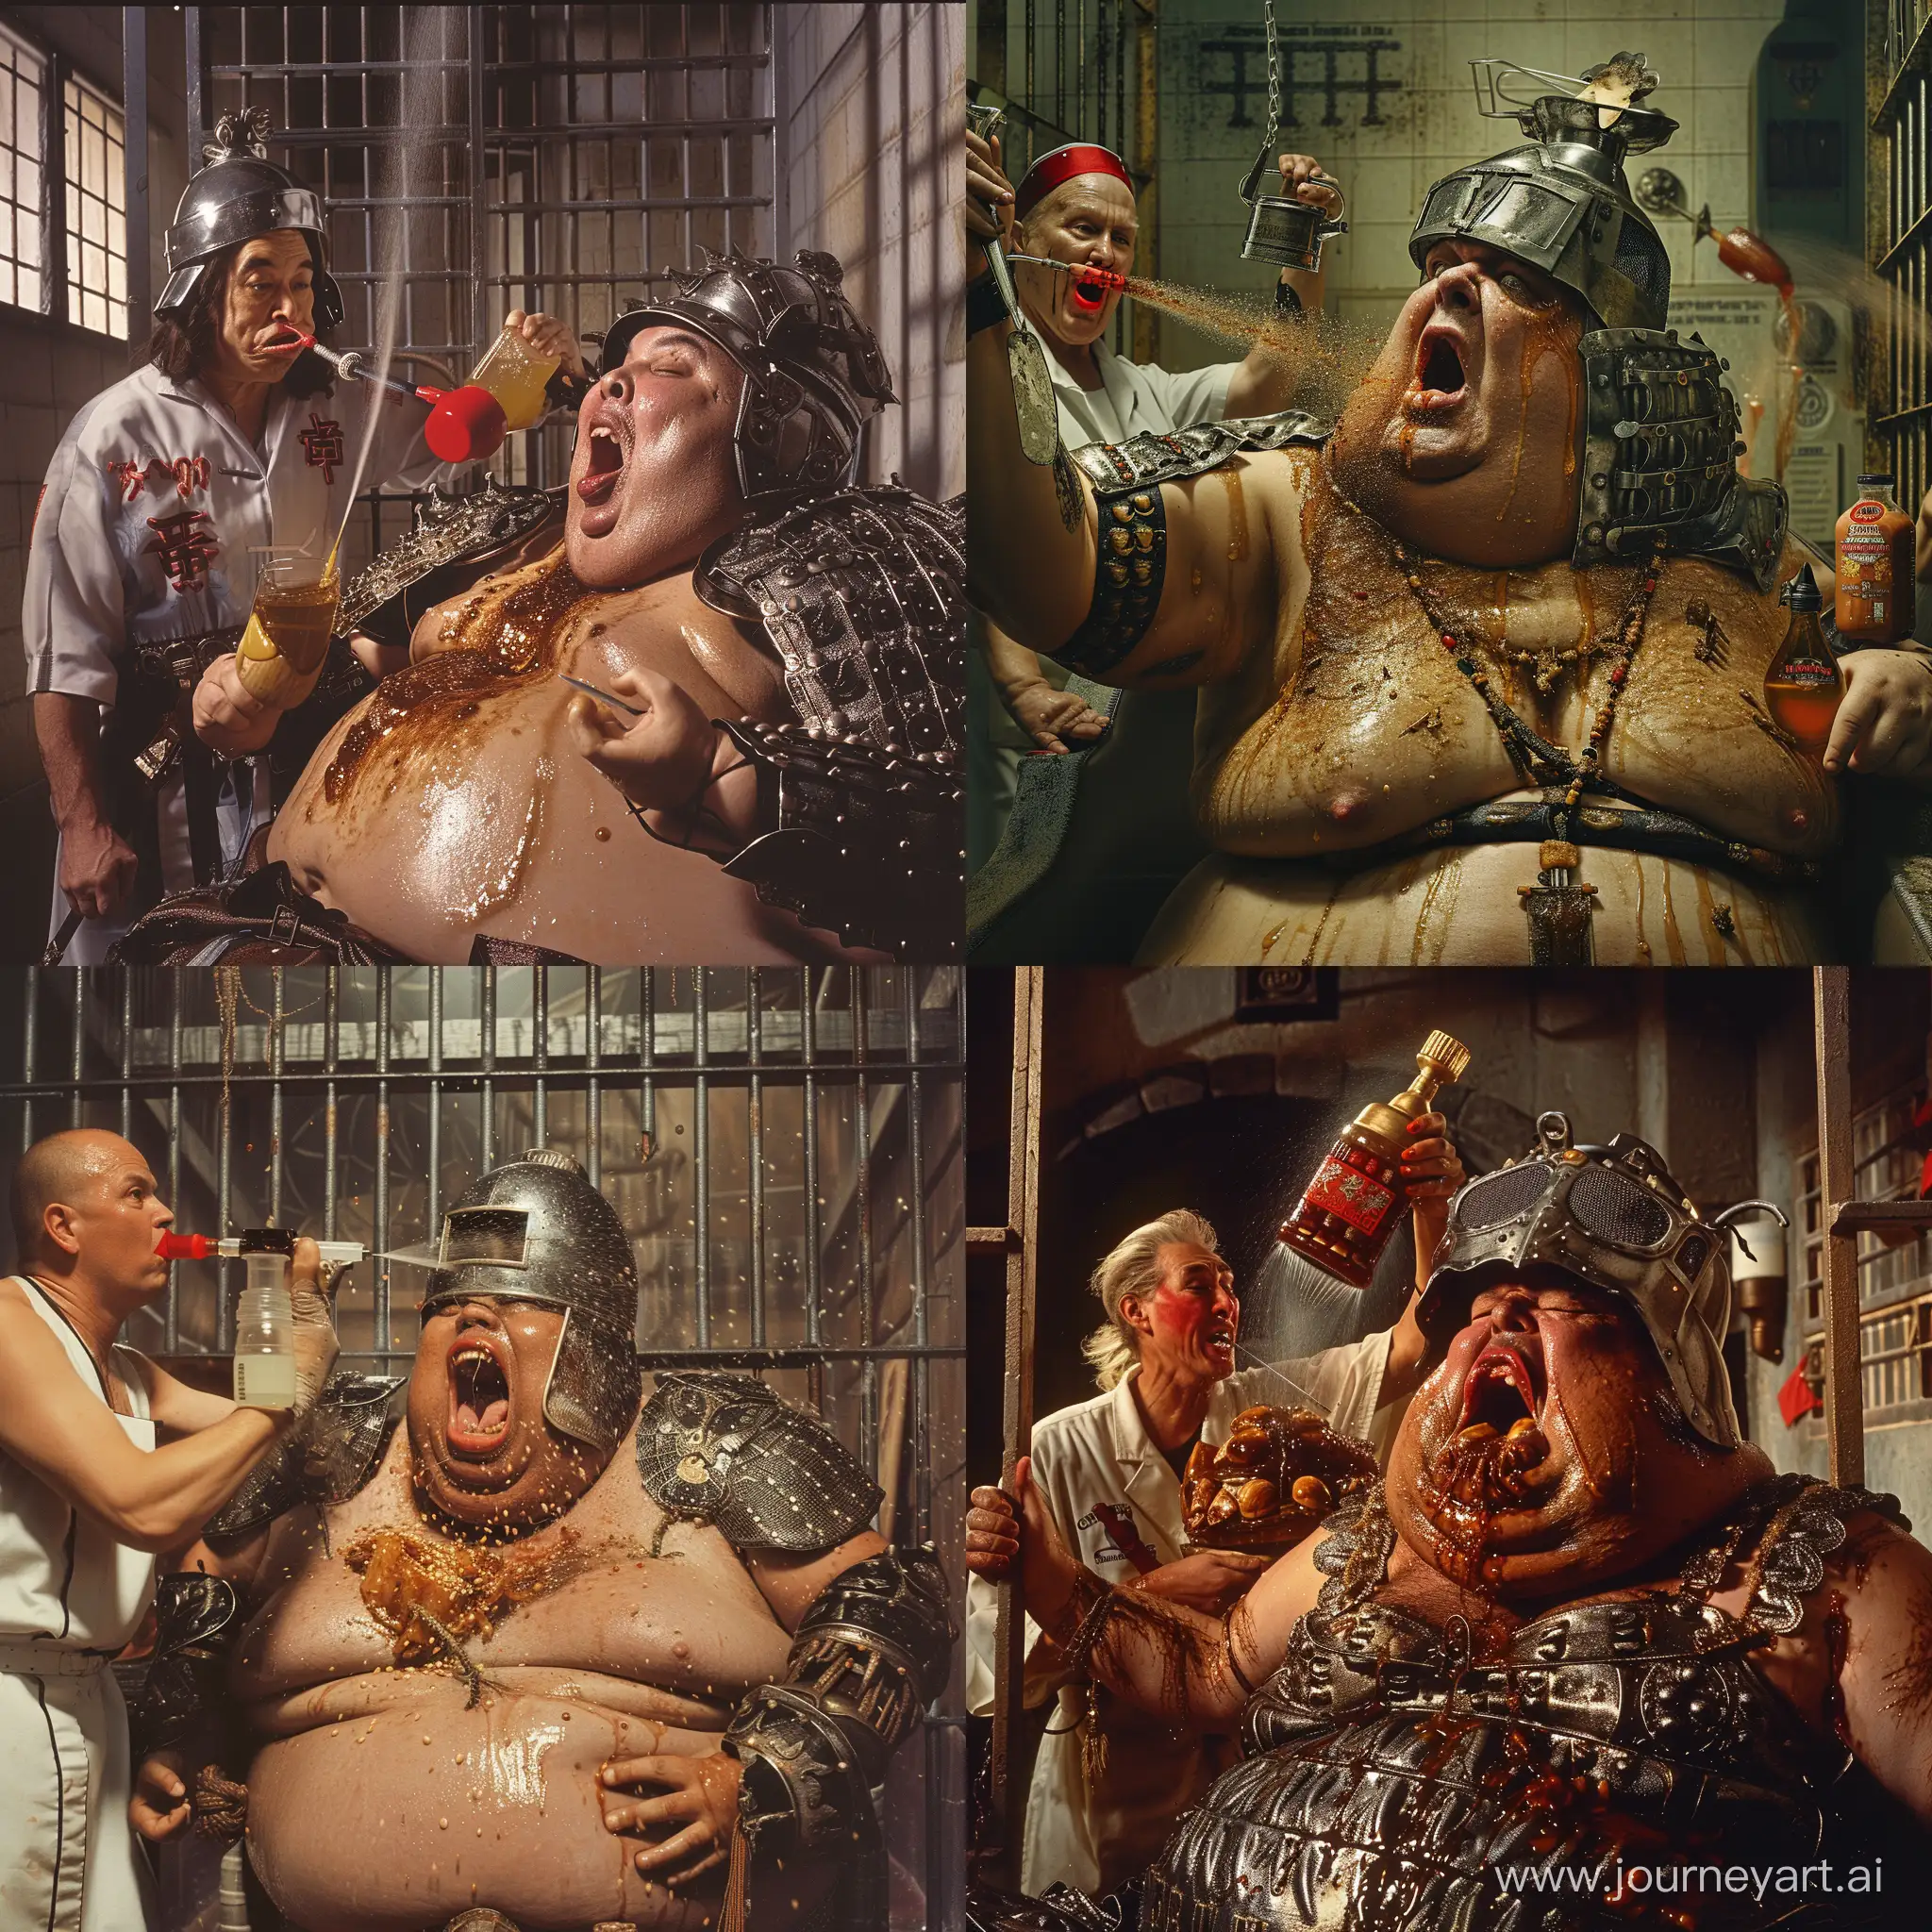 Morbidly obese Sam Bankman-Fried in a luxury prison cell. Medieval Chinese warrior in metal armor with visor helmet is spraying a variety of seed oils and sauces onto Sam and into his wide open mouth. Jim Cramer as a nurse in red lipstick in the background.